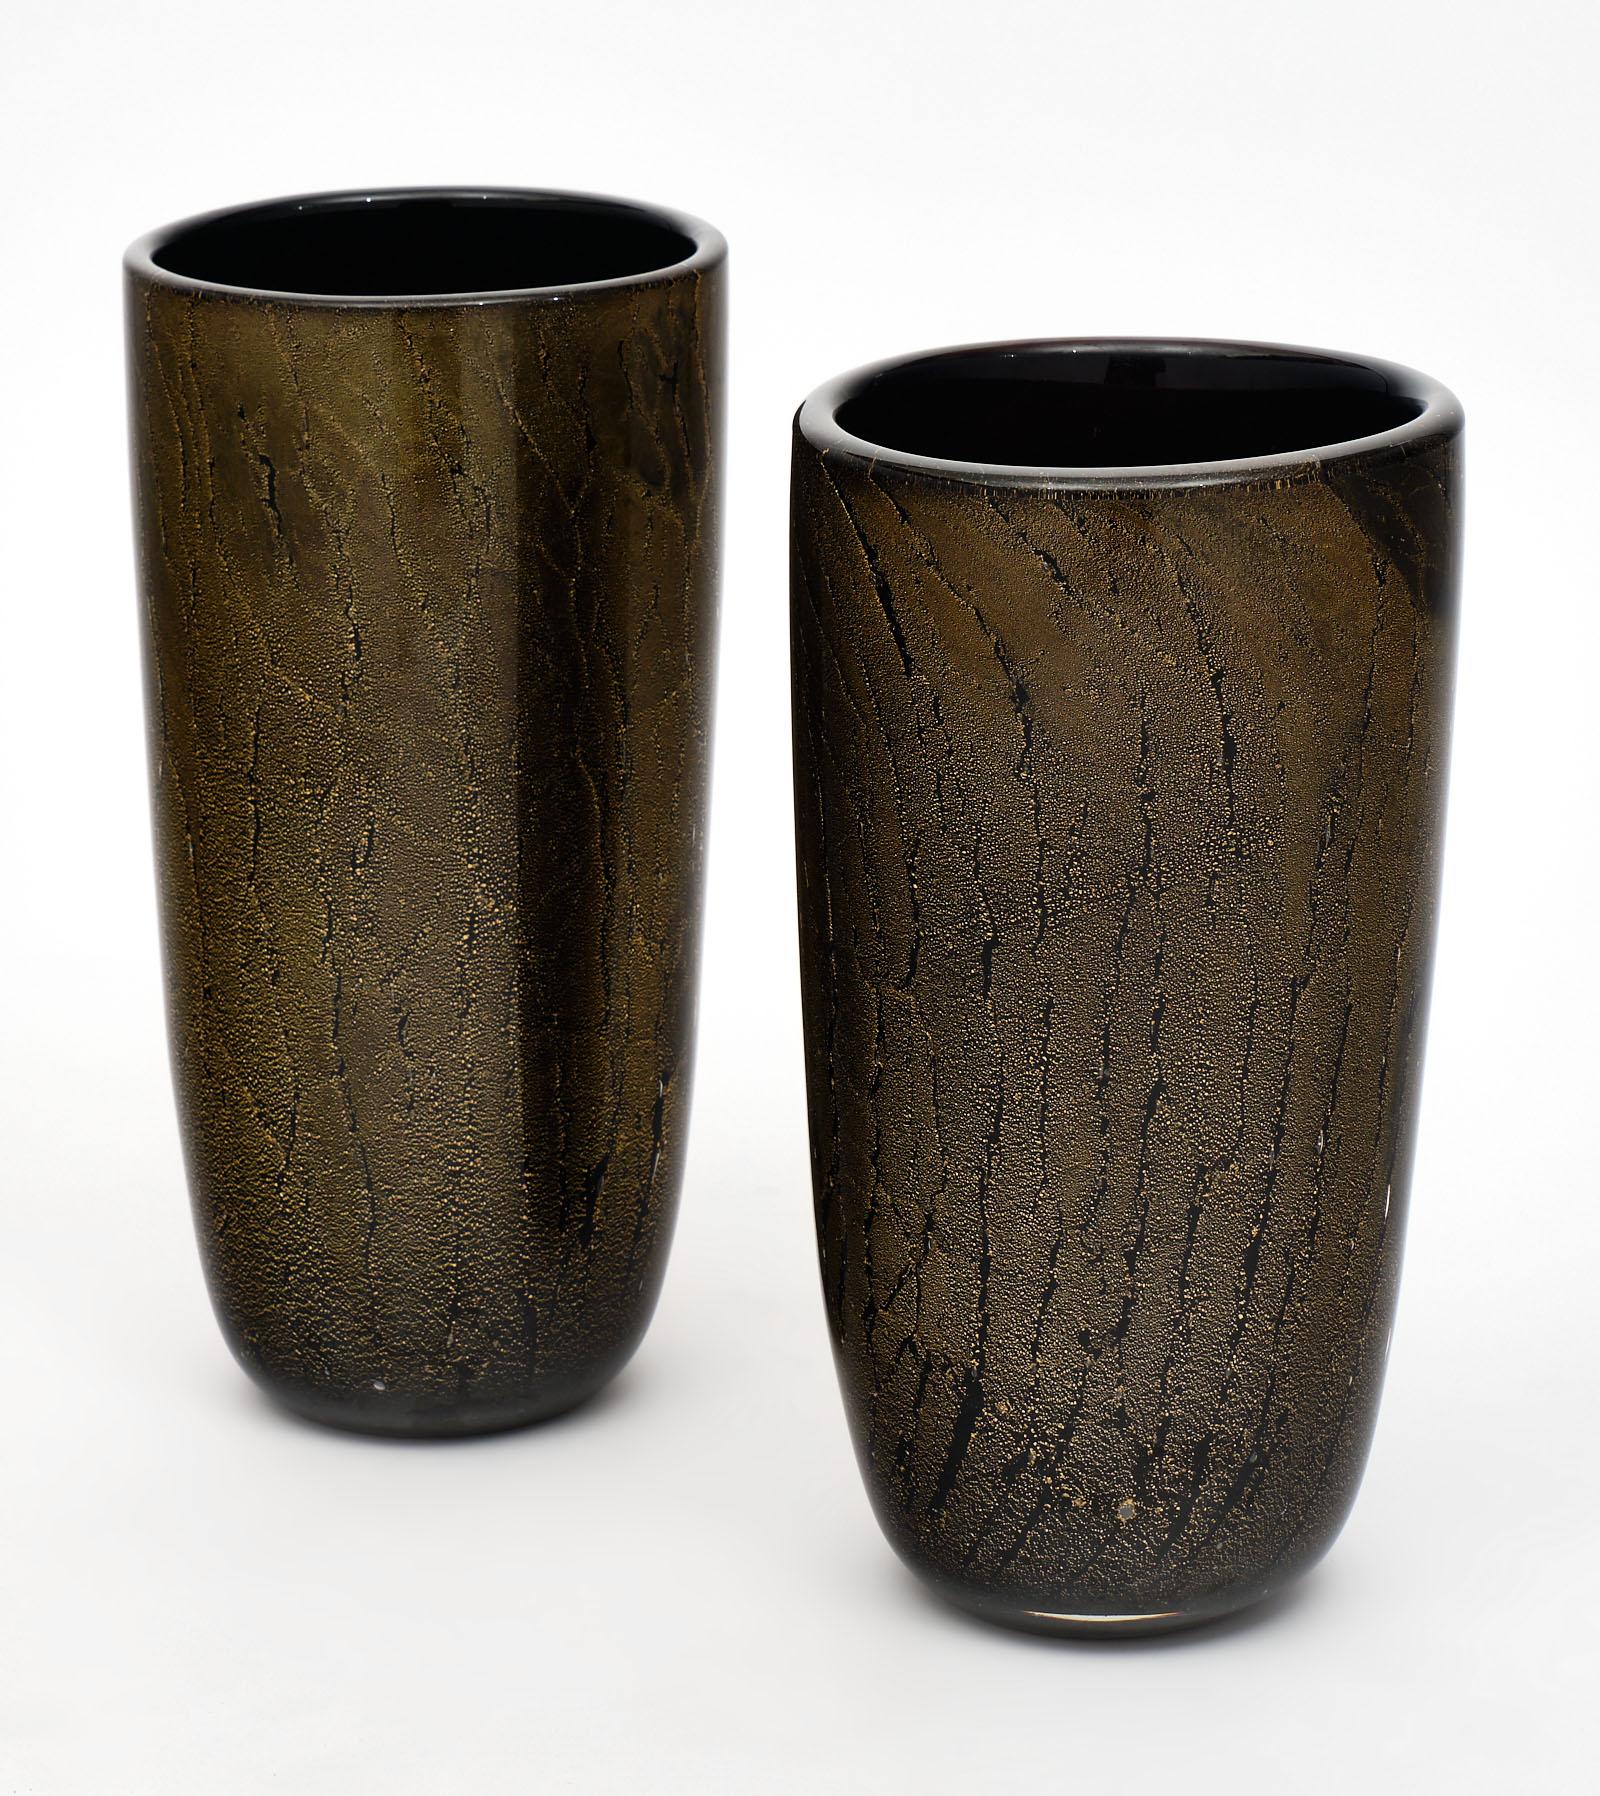 Black and Avventurina Murano glass vases with 23-carat gold leaf applied to the black glass while still in fusion. We love these hand blown pieces, which exude superb craftsmanship. As these vases are hand blown by craftsman in Italy, the size and